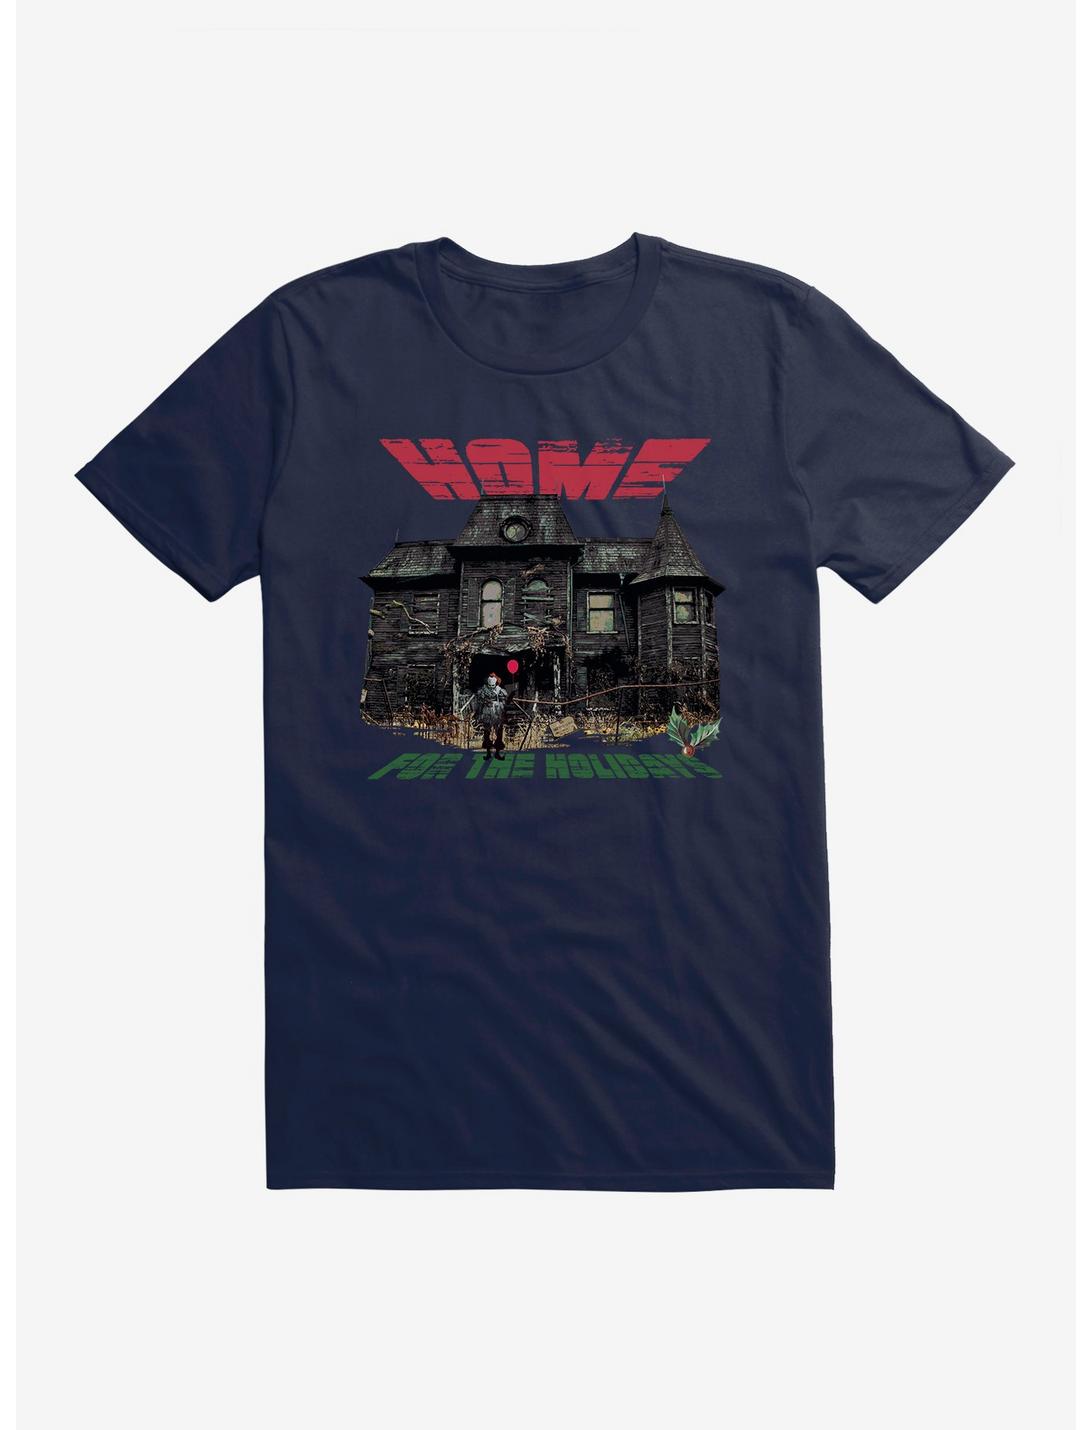 IT Home For The Holidays T-Shirt, MIDNIGHT NAVY, hi-res